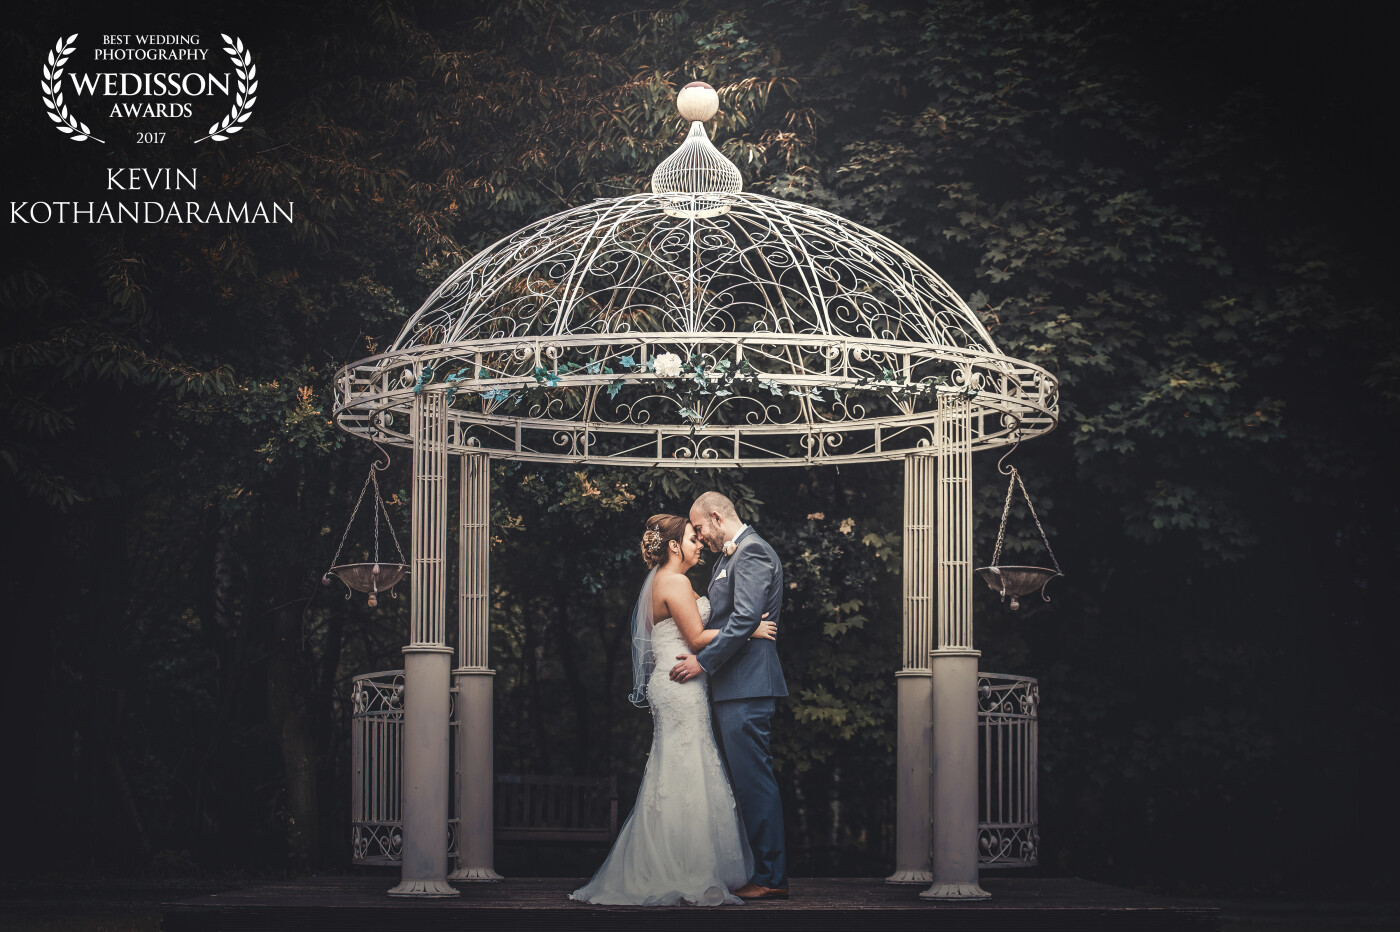 This image was shot at De Vere Theobalds Estate in Hertfordshire. We randomly came across this 'birdcage' whilst walking back from the ceremony to the reception venue.